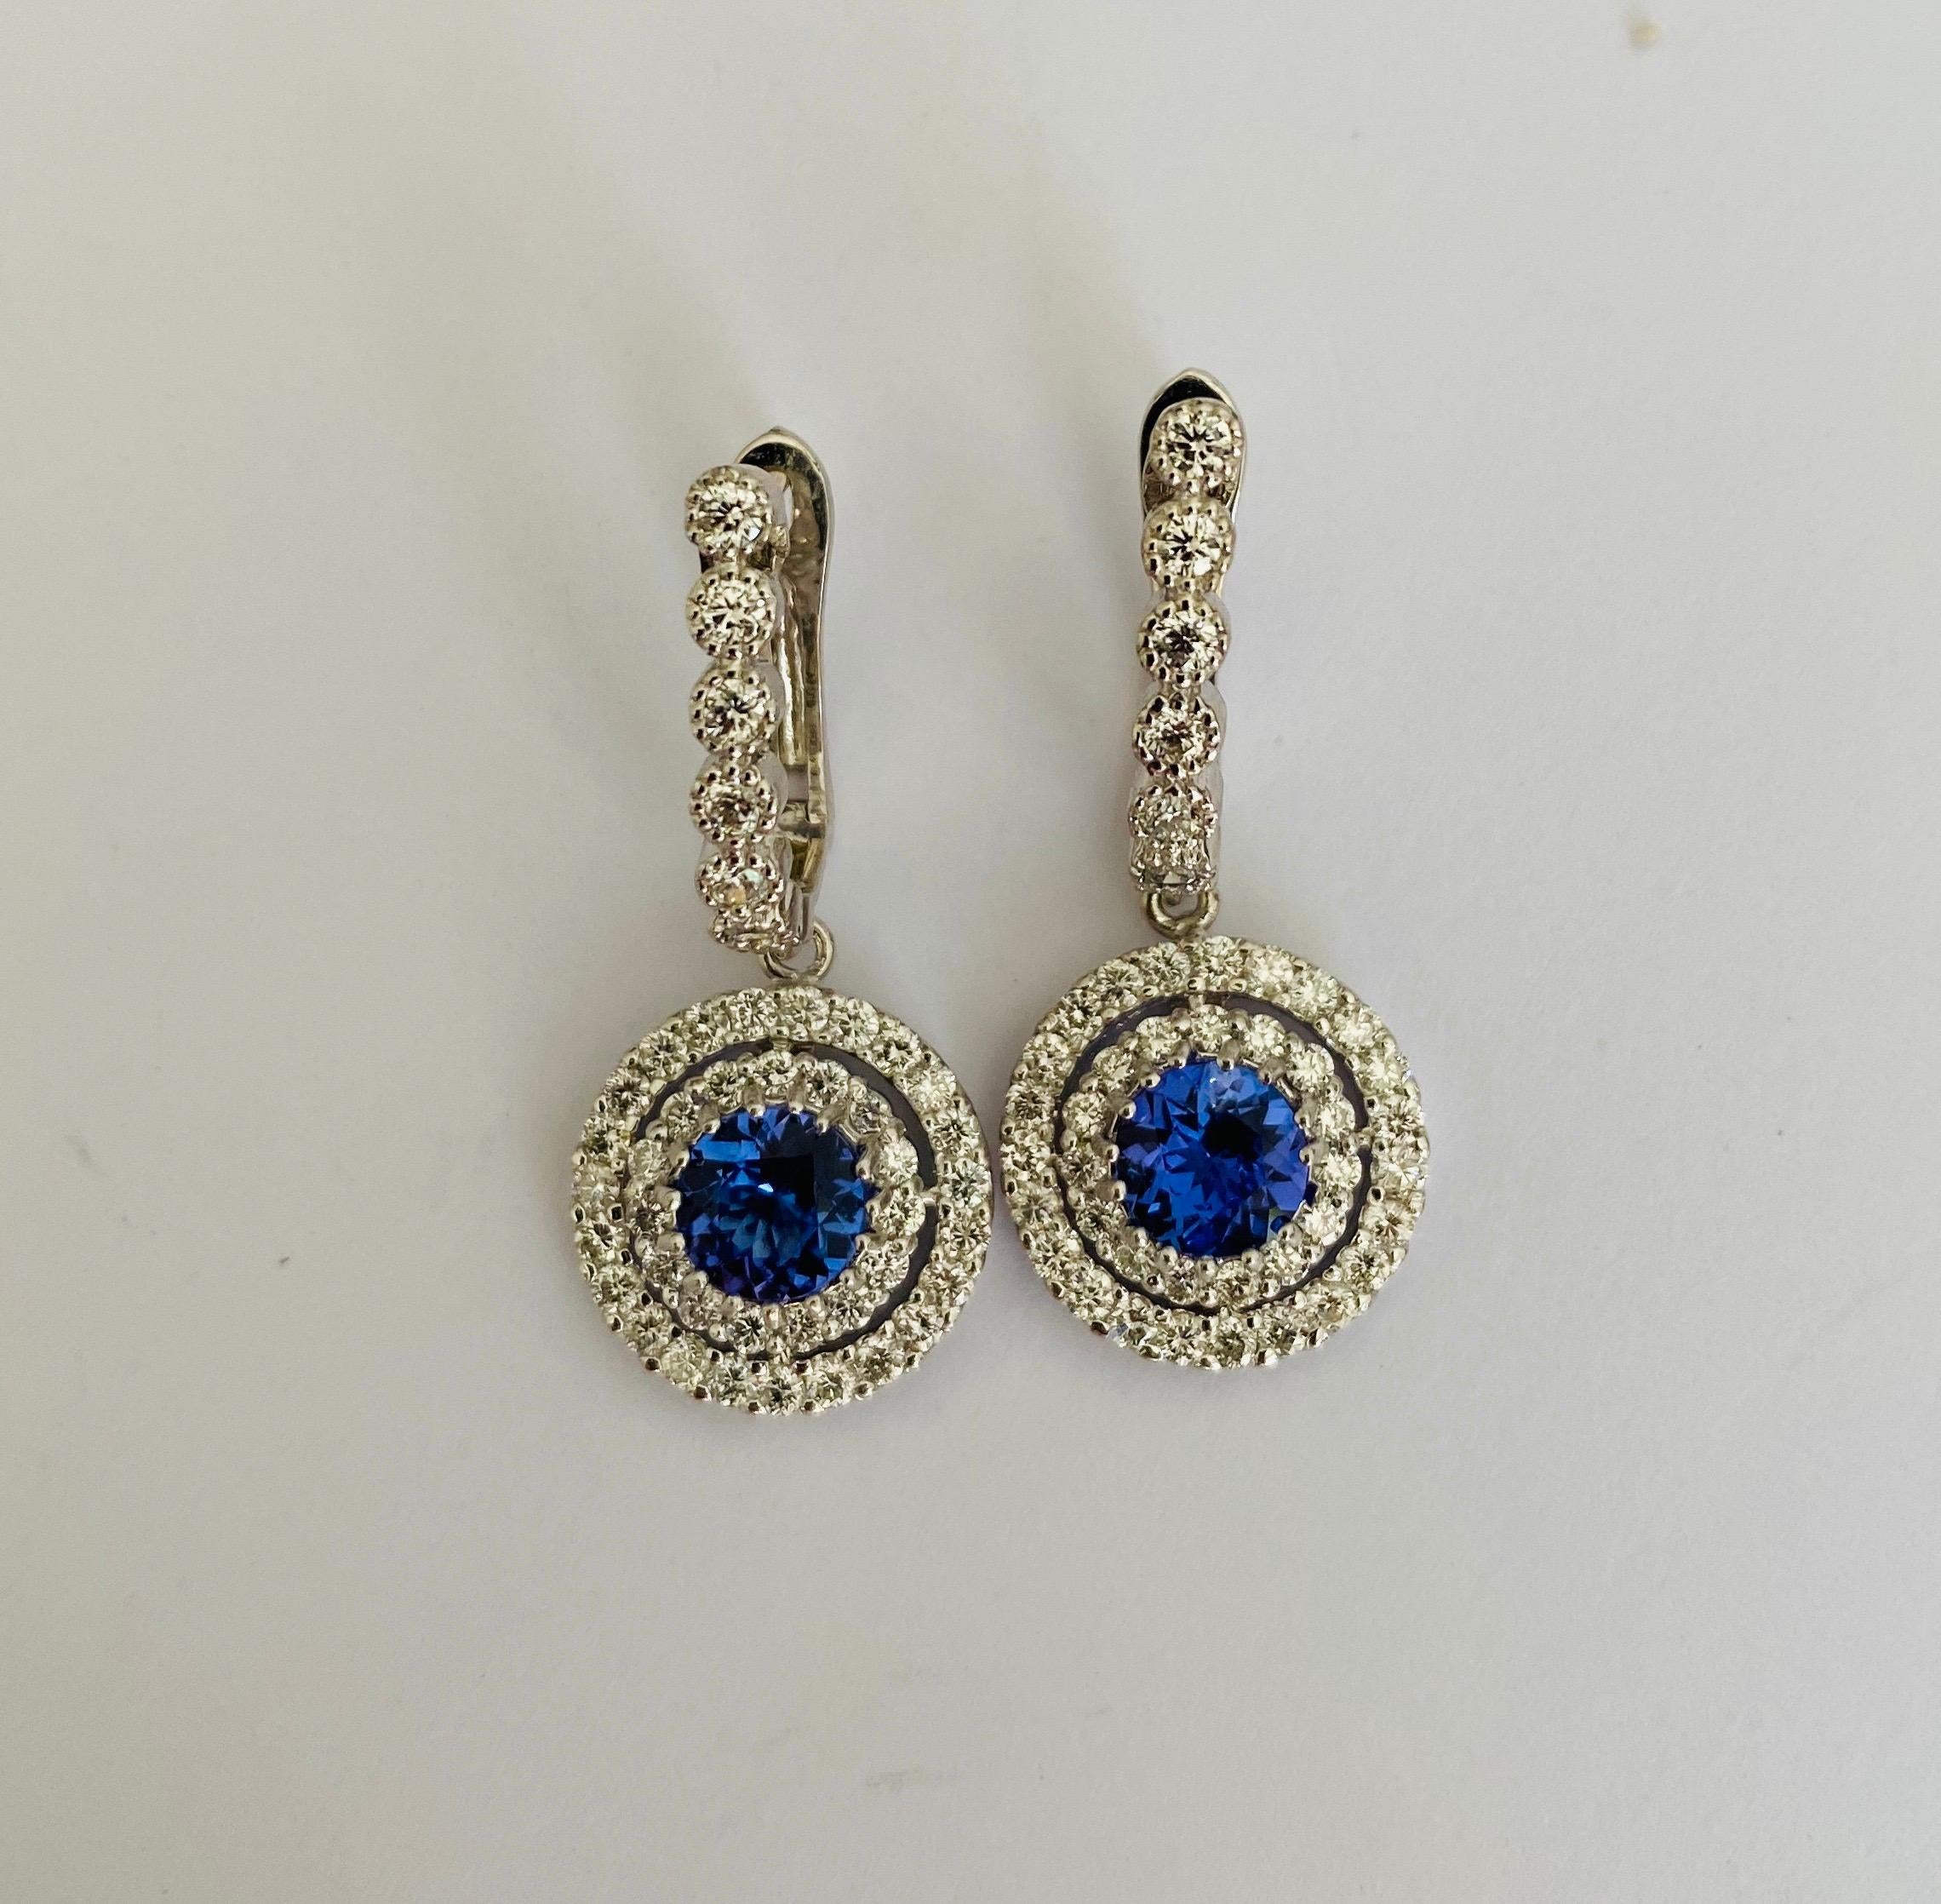 3.18 Carat Tanzanite Diamond White Gold Earrings In New Condition For Sale In Los Angeles, CA